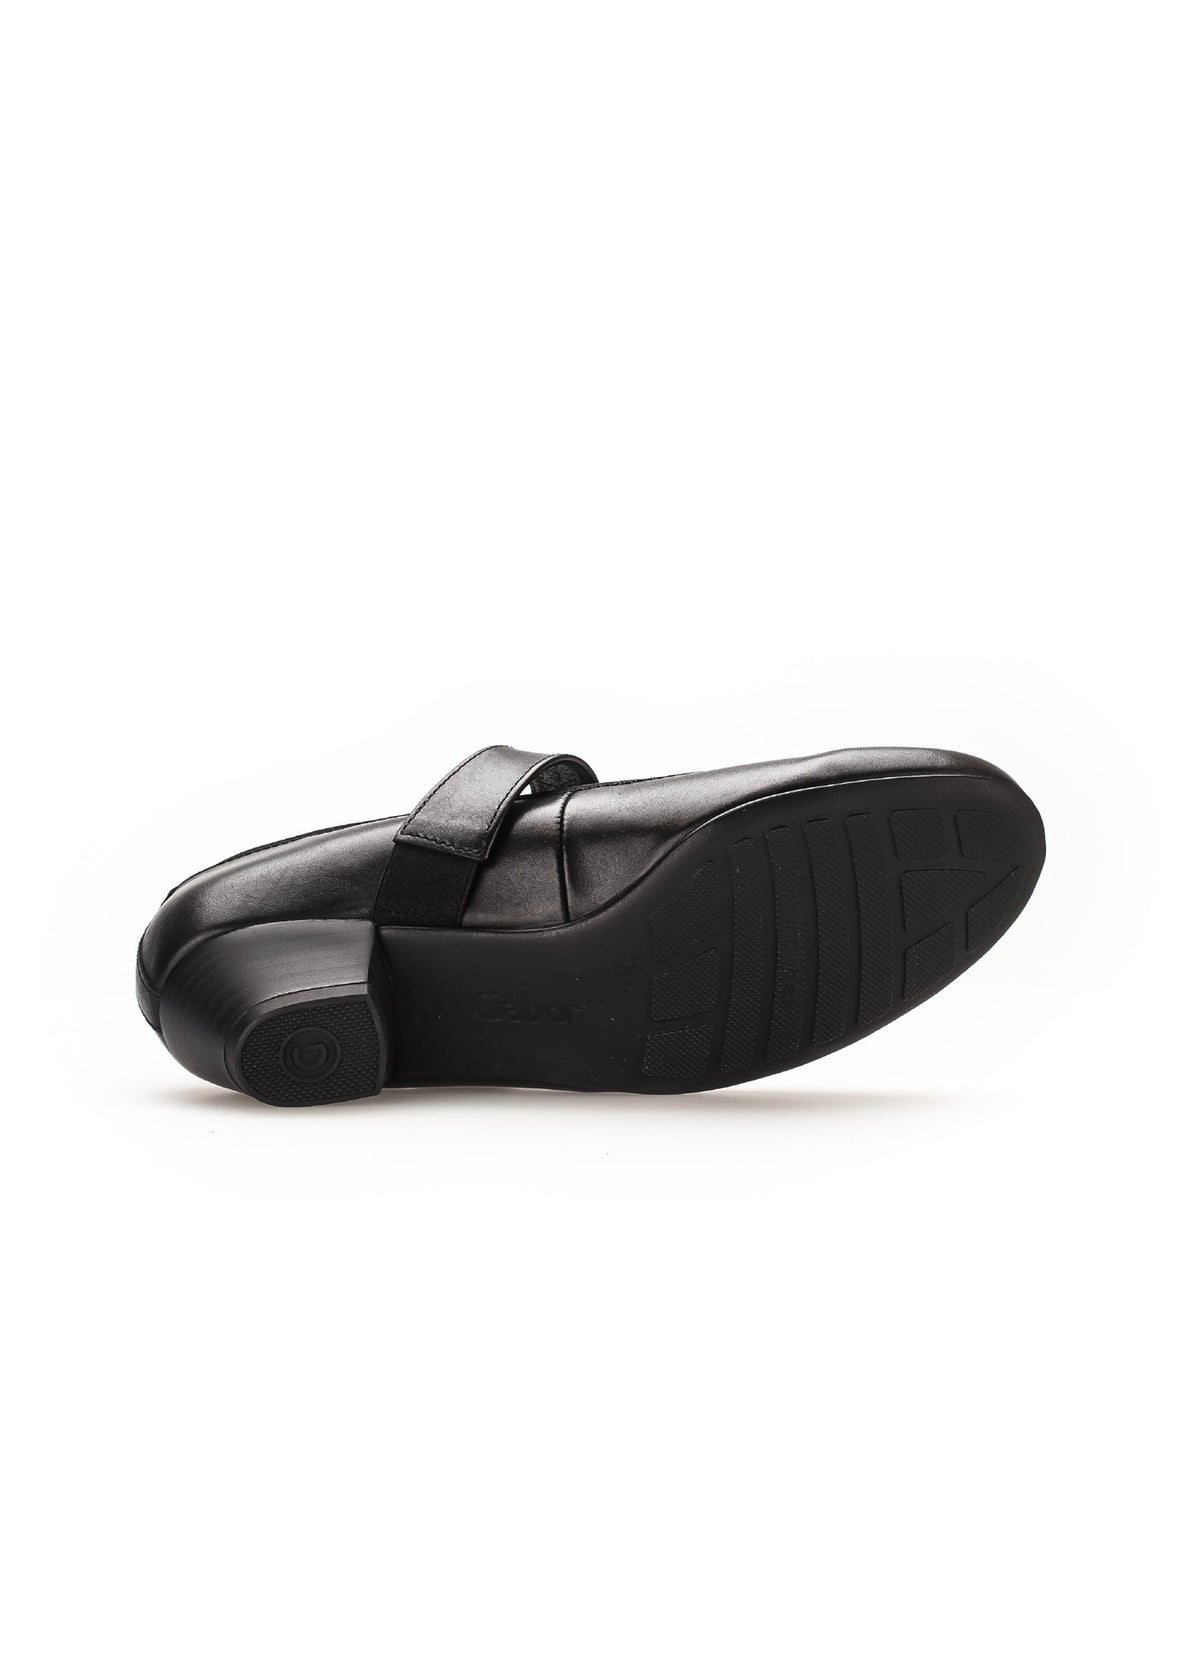 Open-toed shoes with velcro straps - black leather